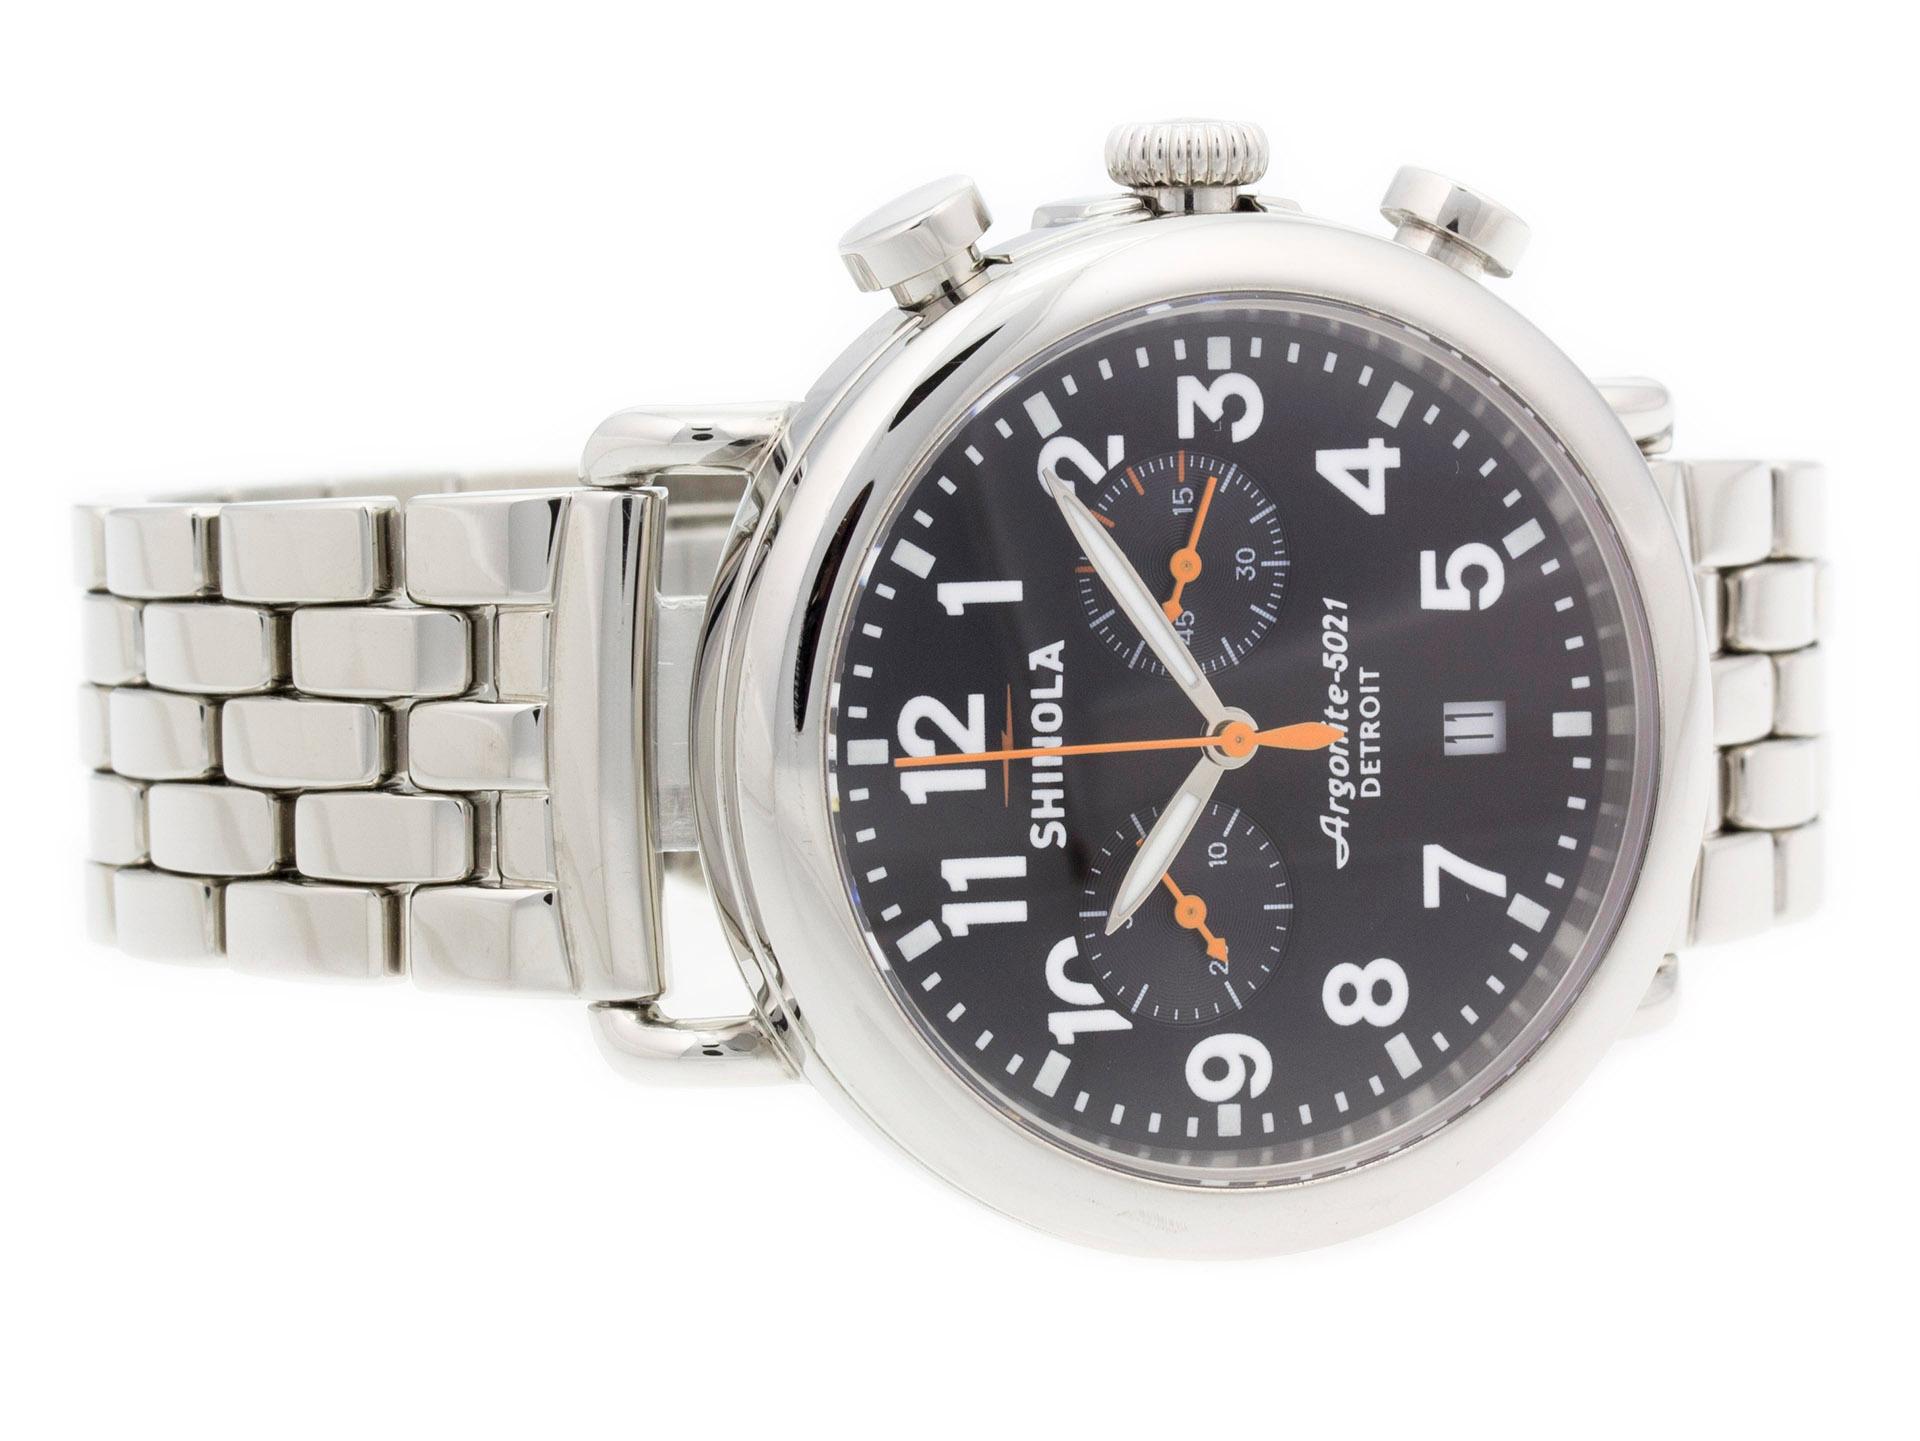 Steel Shinola The Runwell Chrono Quartz Watch with a 41mm Case, Black Dial, and Steel Bracelet with Folding Clasp. Features include Hours, Minutes, Seconds, Date, and Chronograph. Comes with a Deluxe Gift Box and 2 Year Store